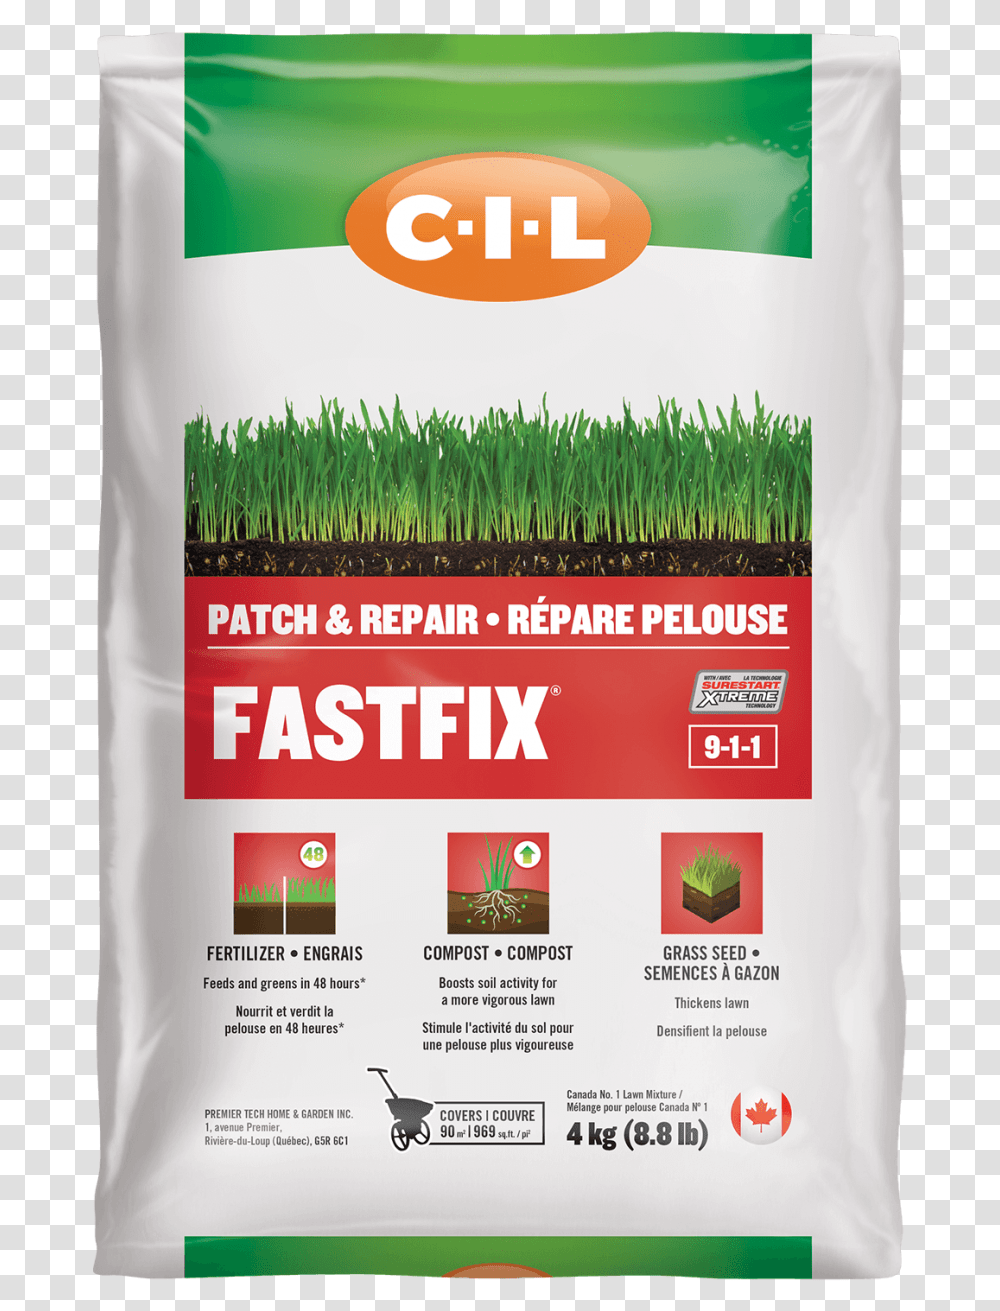 Cil Patch Amp Repair Fastfix 9 1 Cil Iron Plus Lawn Recovery And Repair, Plant, Paper, Flyer, Poster Transparent Png